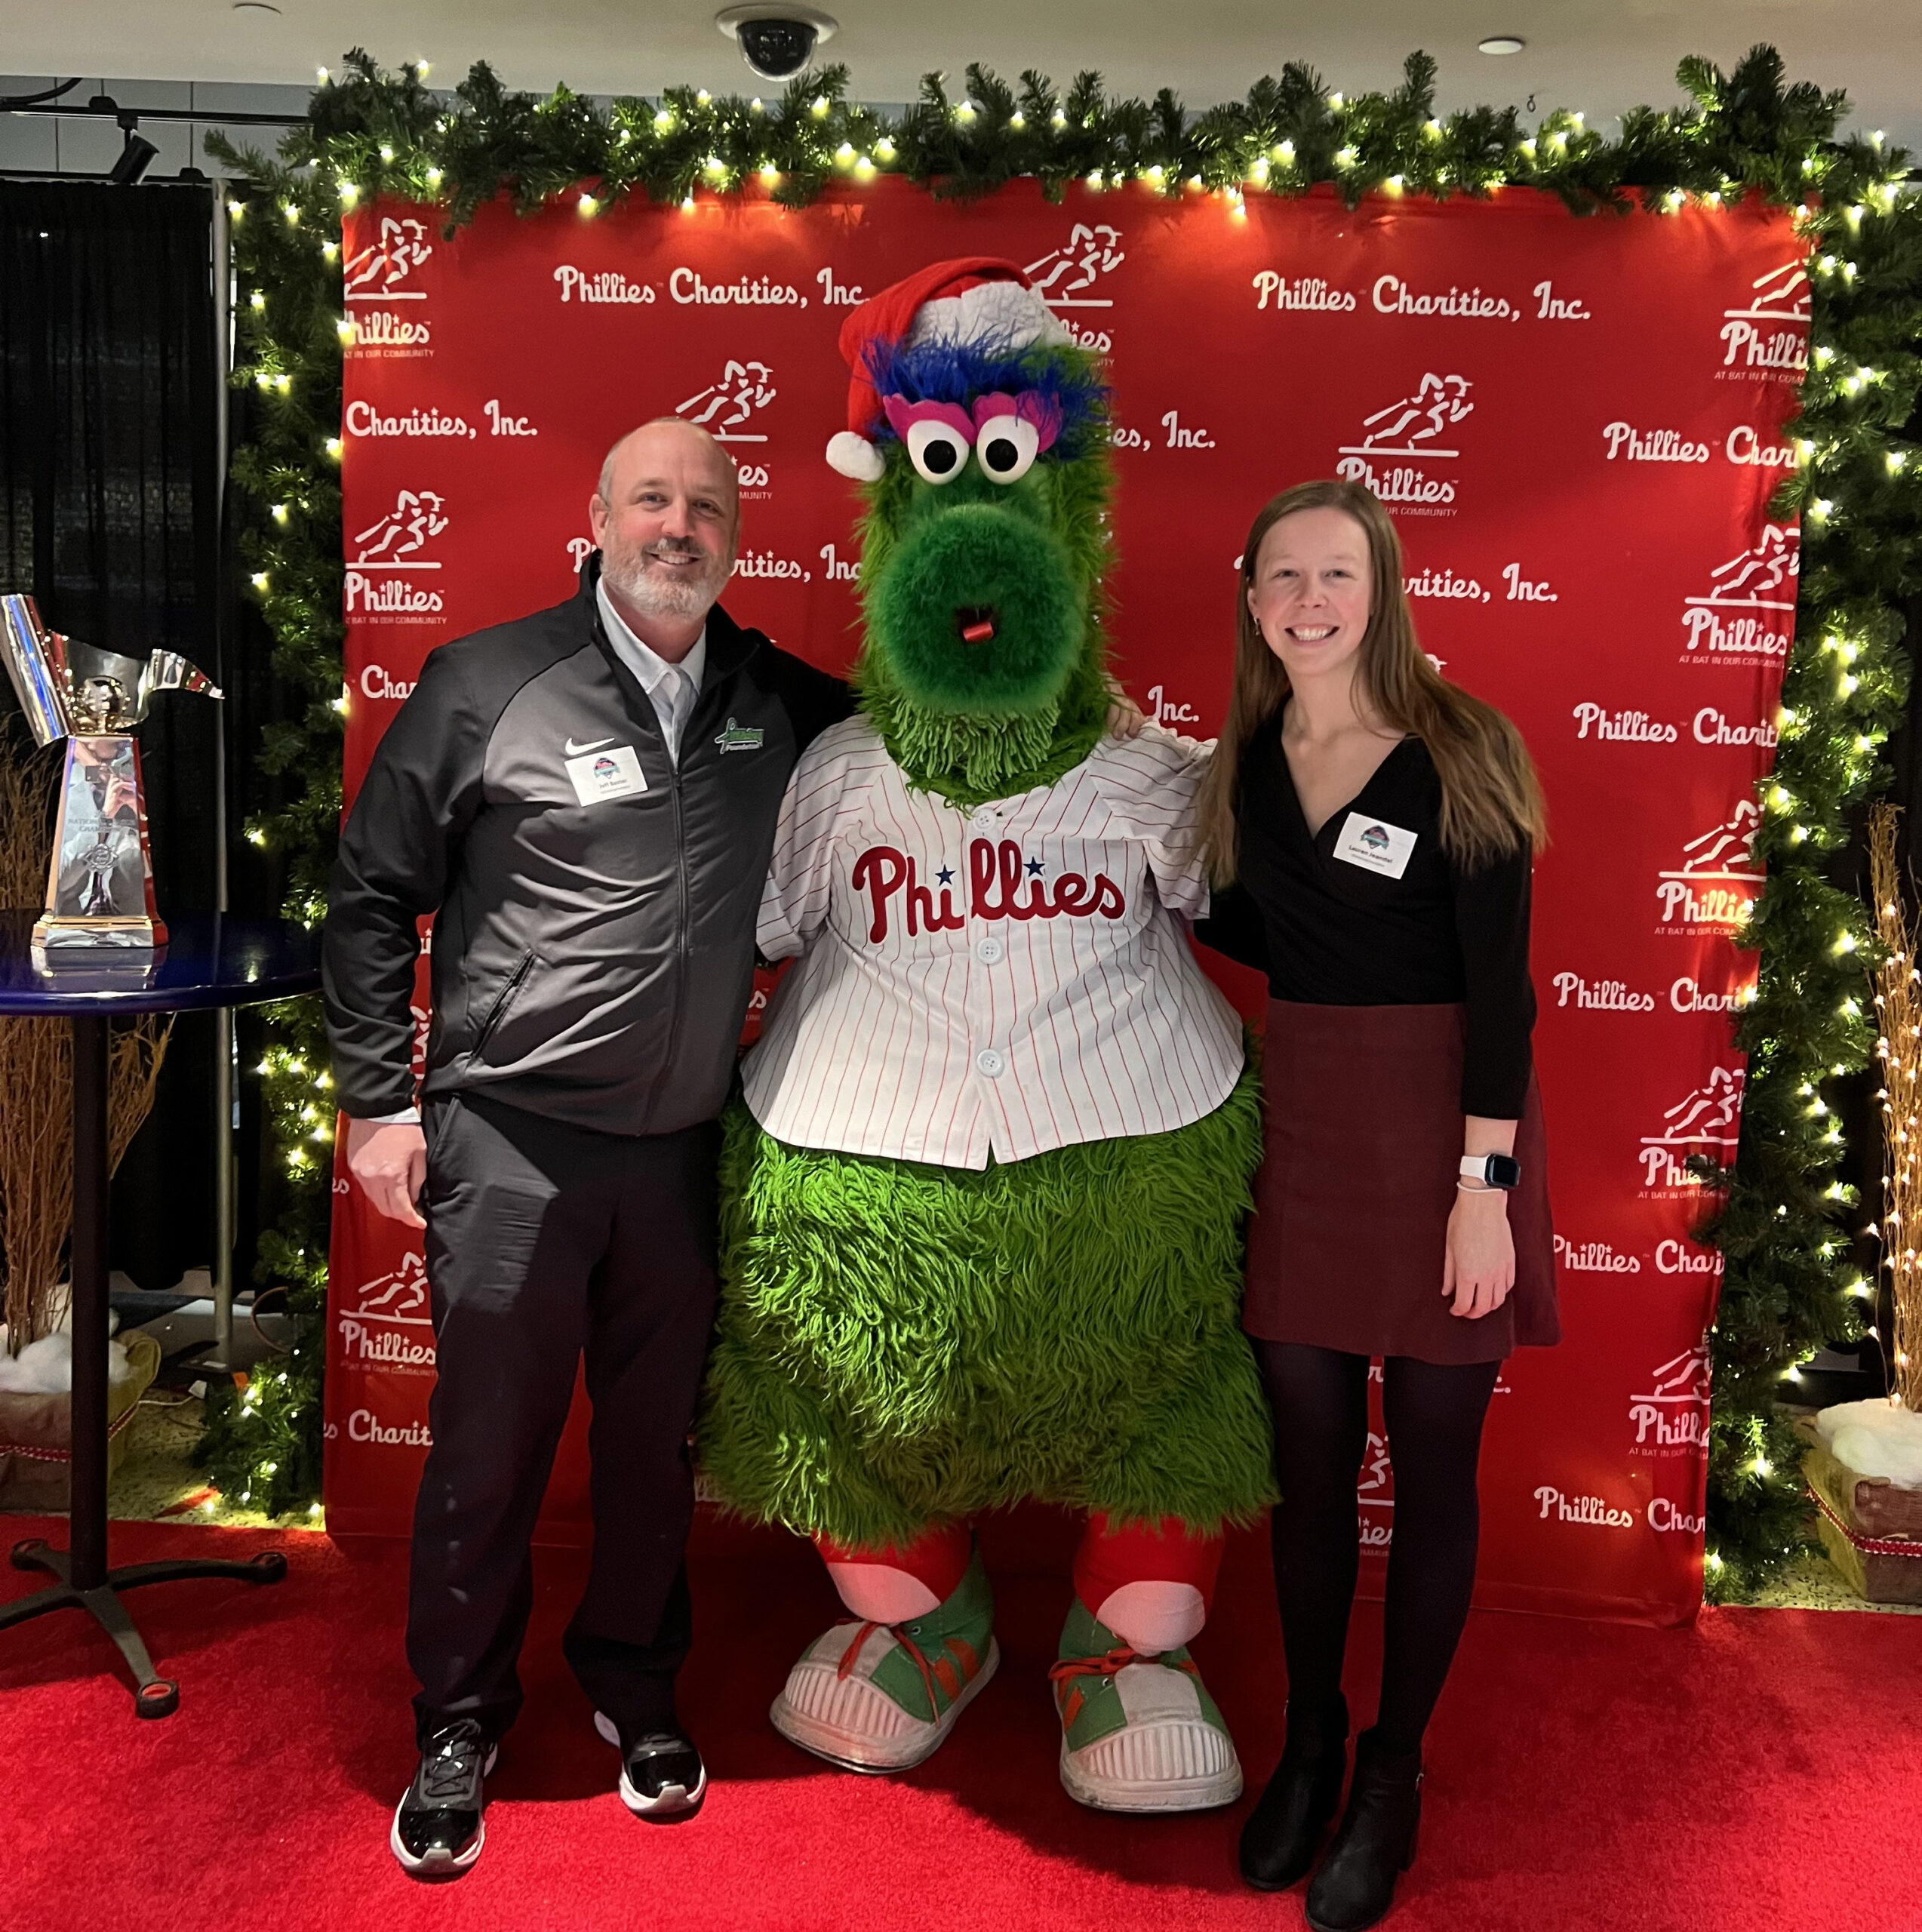 HEADstrong Foundation Named Community Hero By Phillies Charities, Inc.